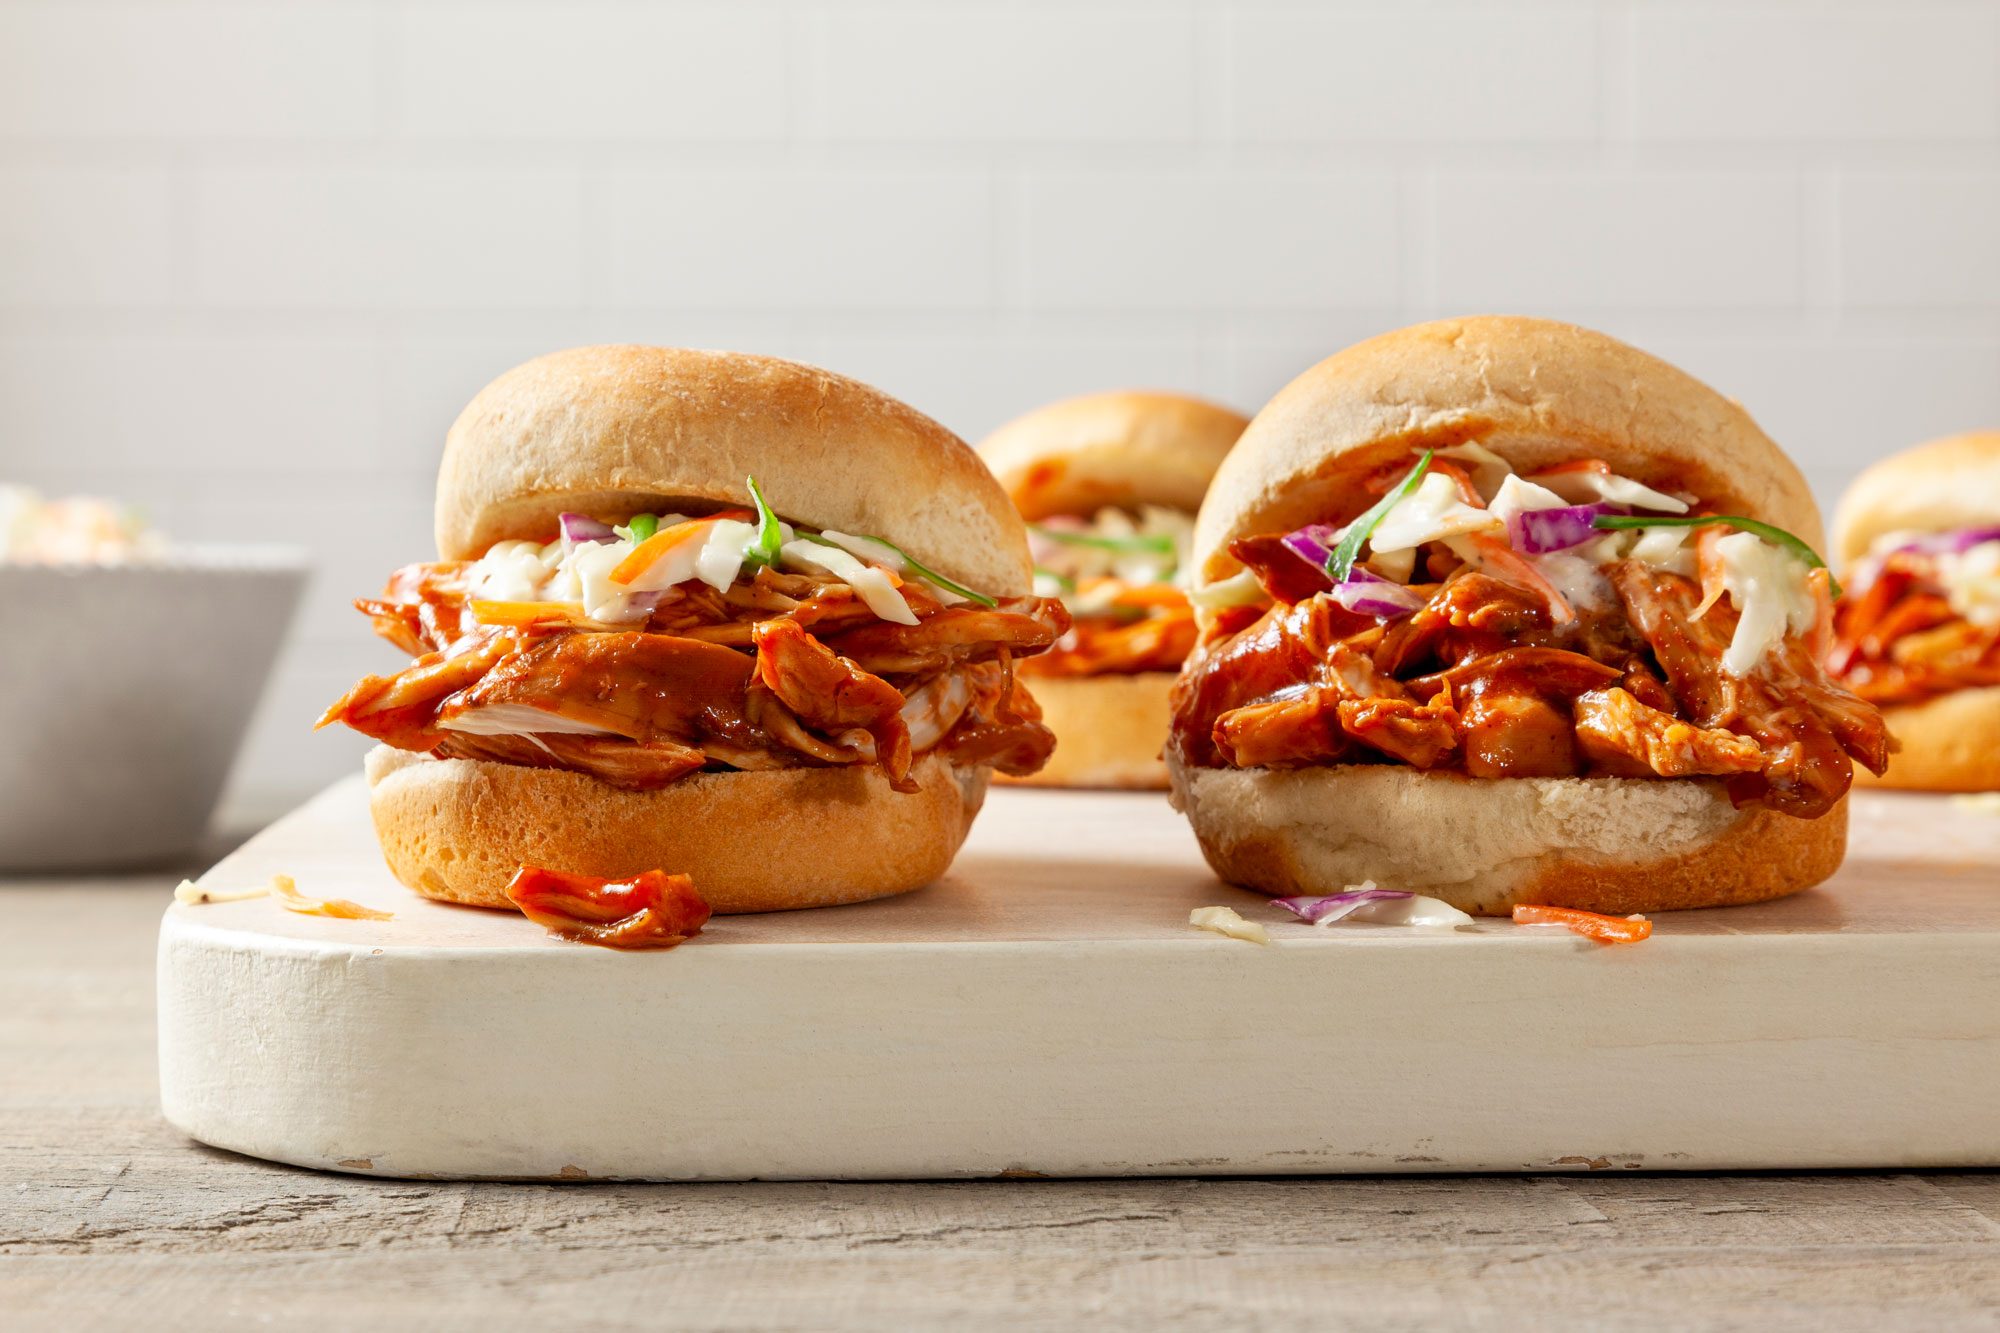 Barbecue Chicken Sliders on wooden surface